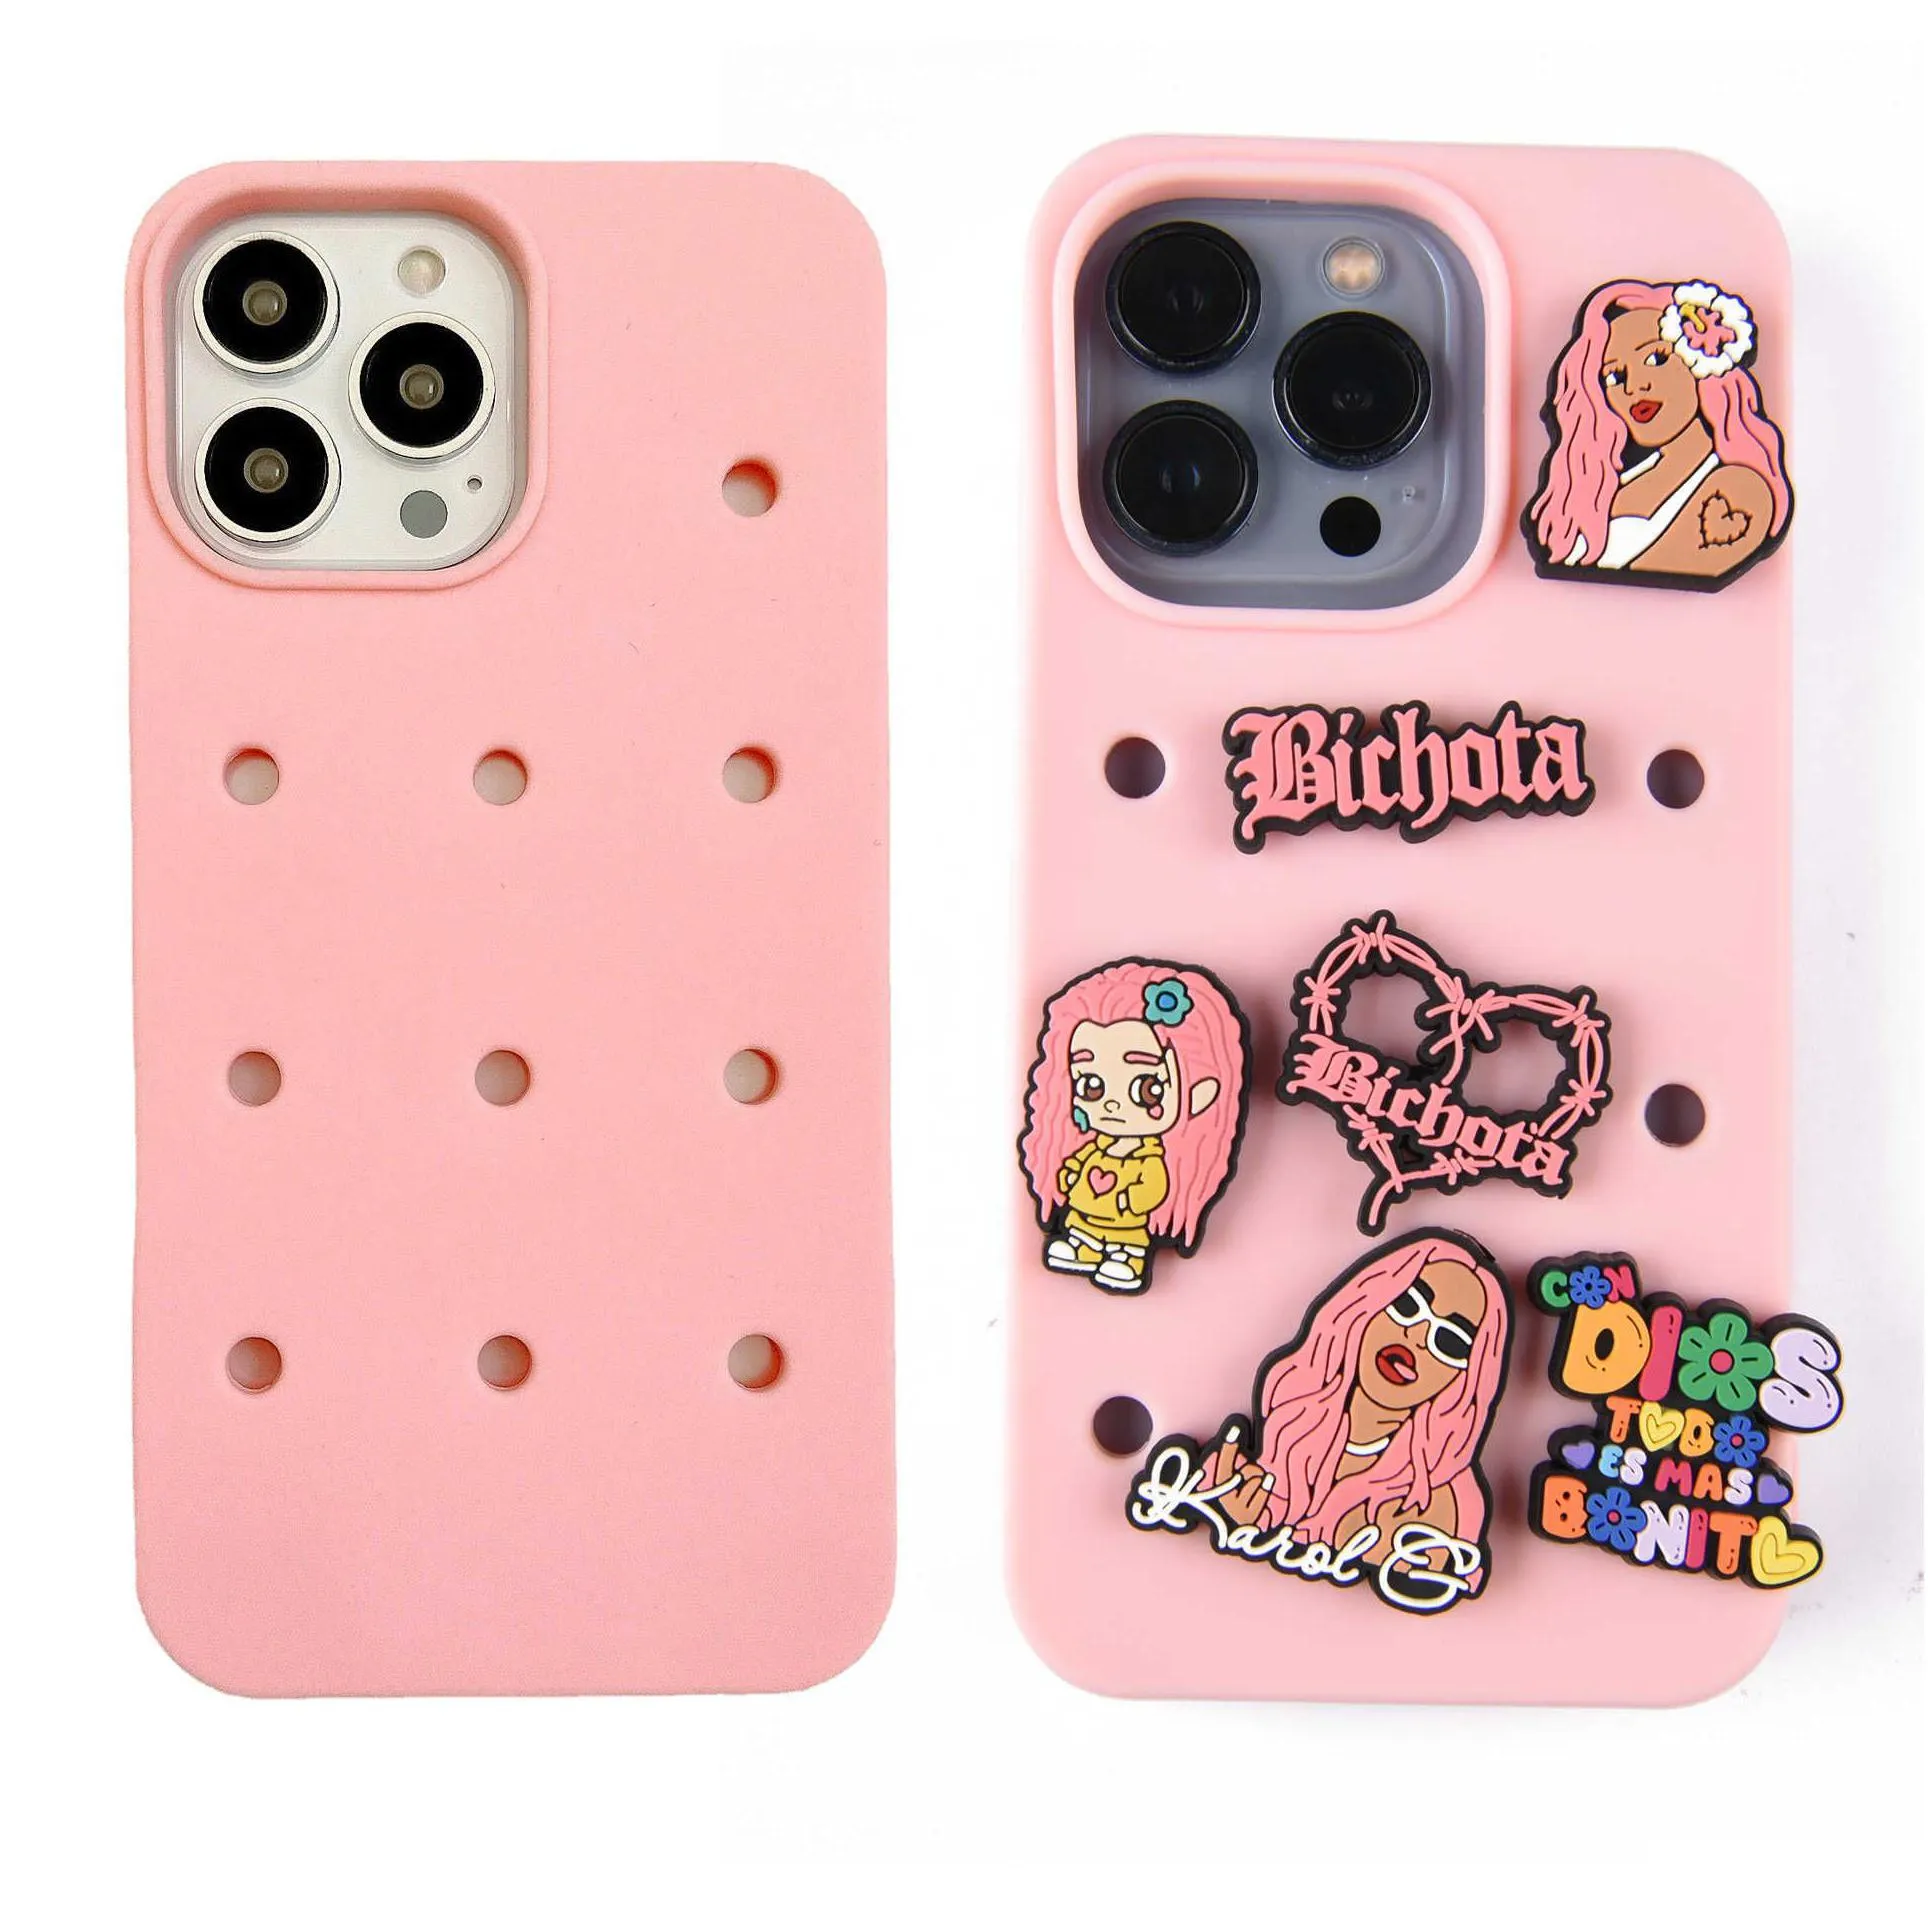 shoe parts accessories selling in stock multi color silicone mobile phone cases diy charms phone case